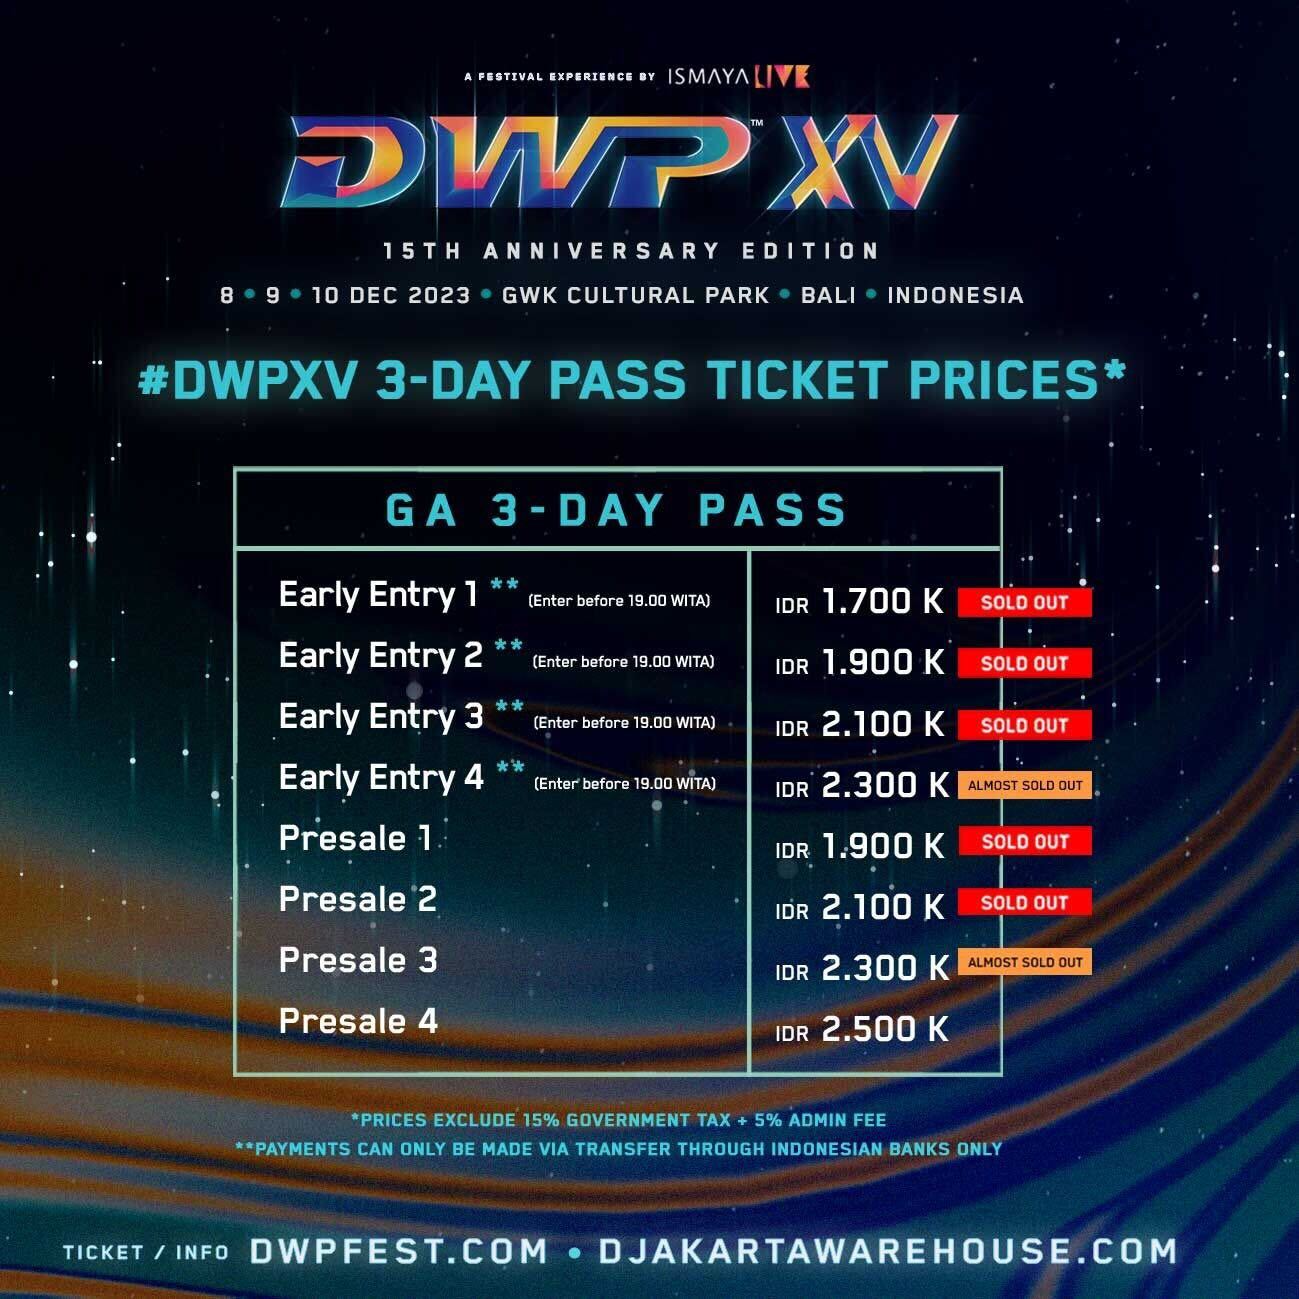 DJAKARTA WAREHOUSE PROJECT TICKETS ARE ON SALE NOW! image